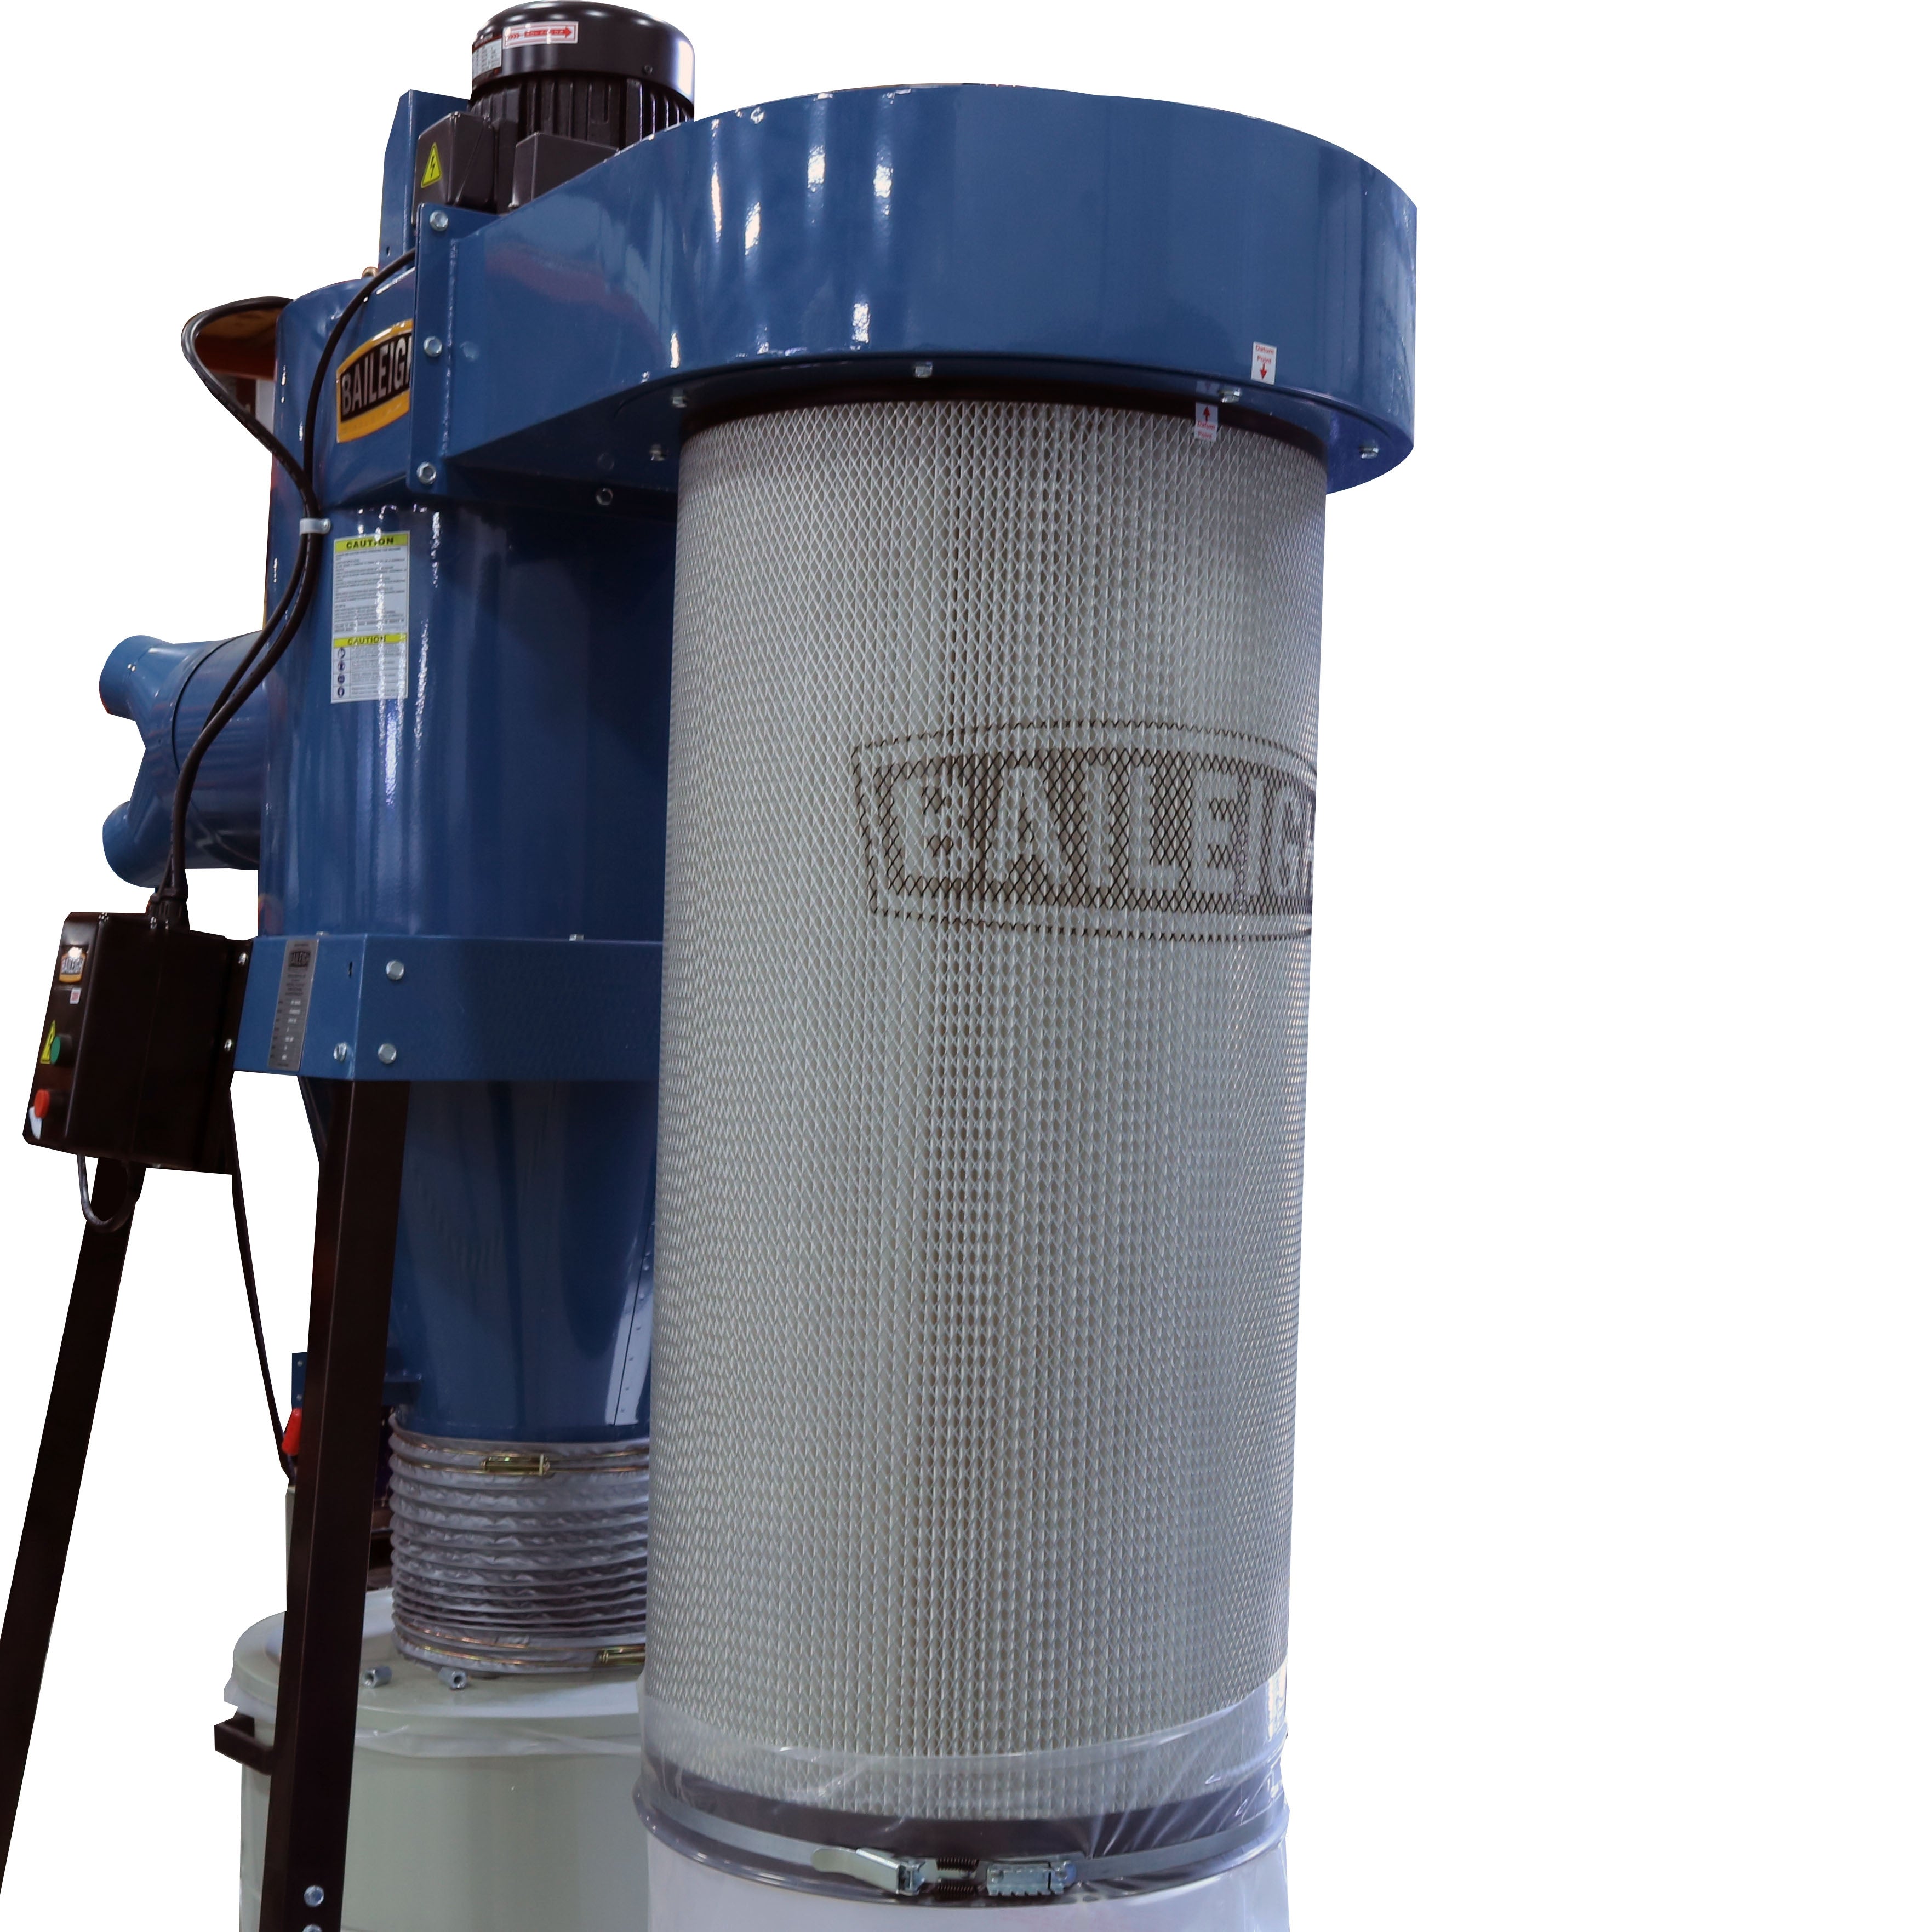 Baileigh DC-3600C 5HP 220V 3 Phase Cyclone Style Dust Collector with Remote Start, 3600 CFM, 60 Gallon Drum